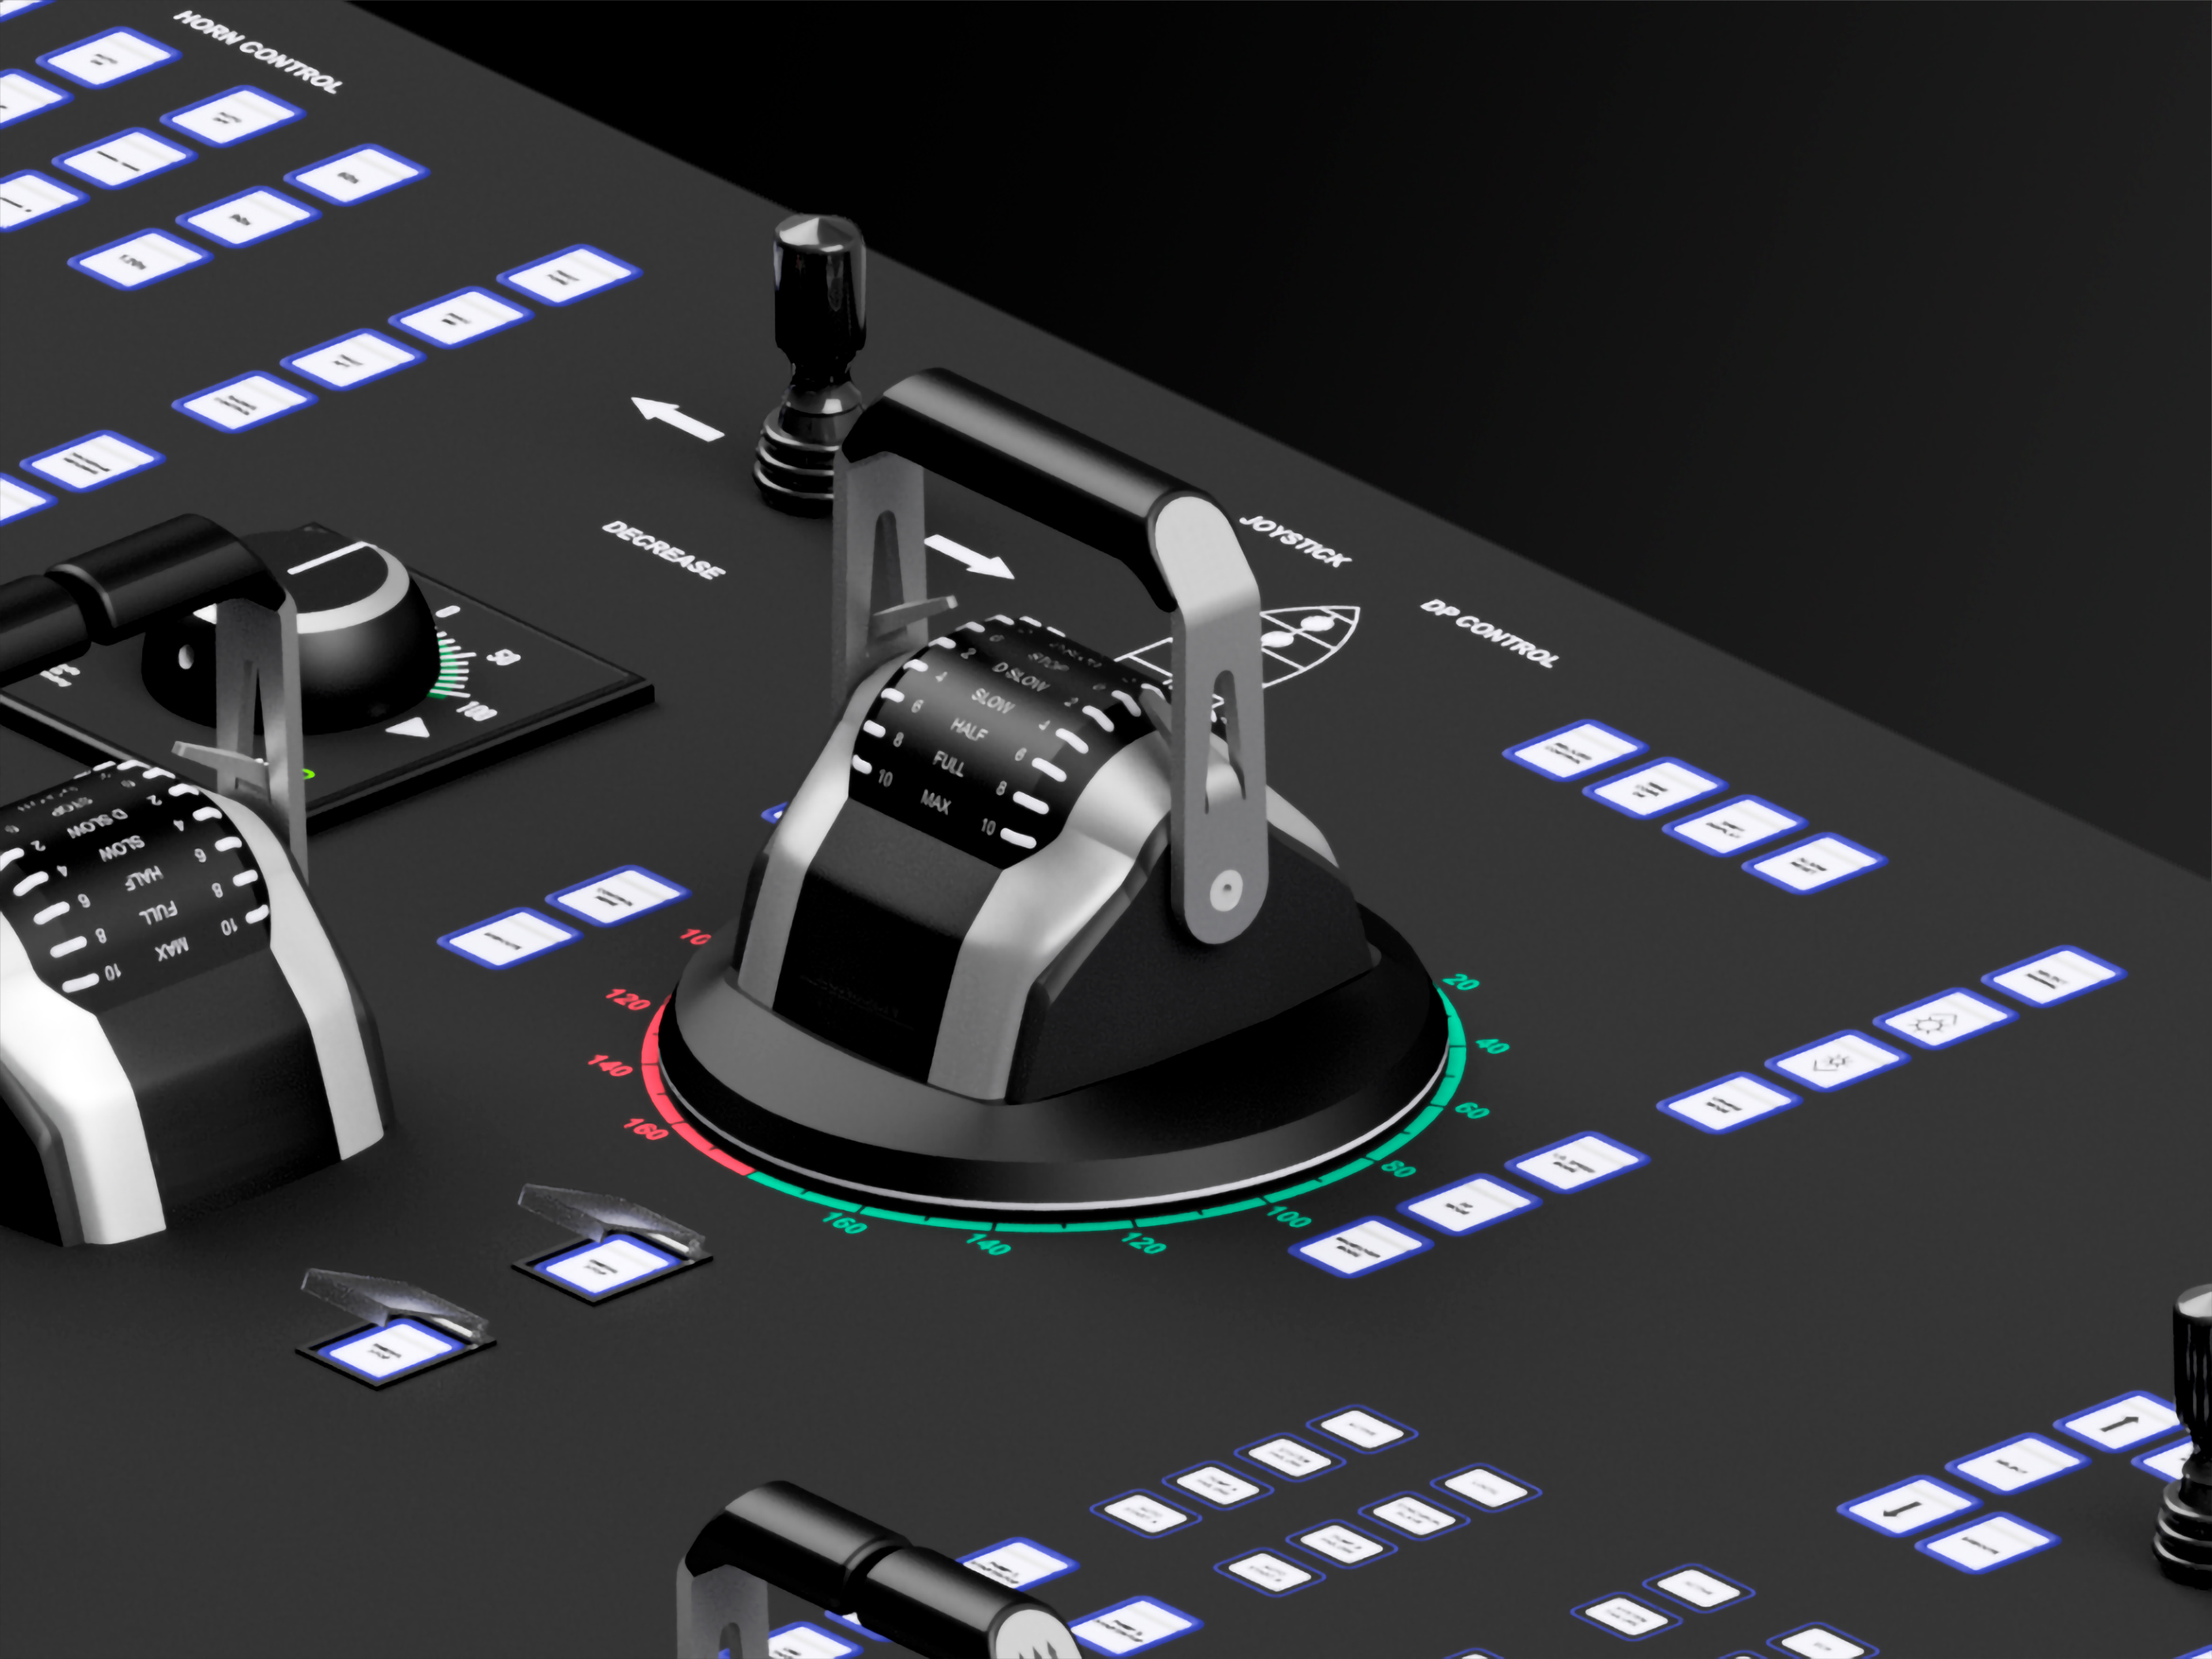 The image shows a unique 3D model of a propulsion control panel with control levers for Megayachts, side view